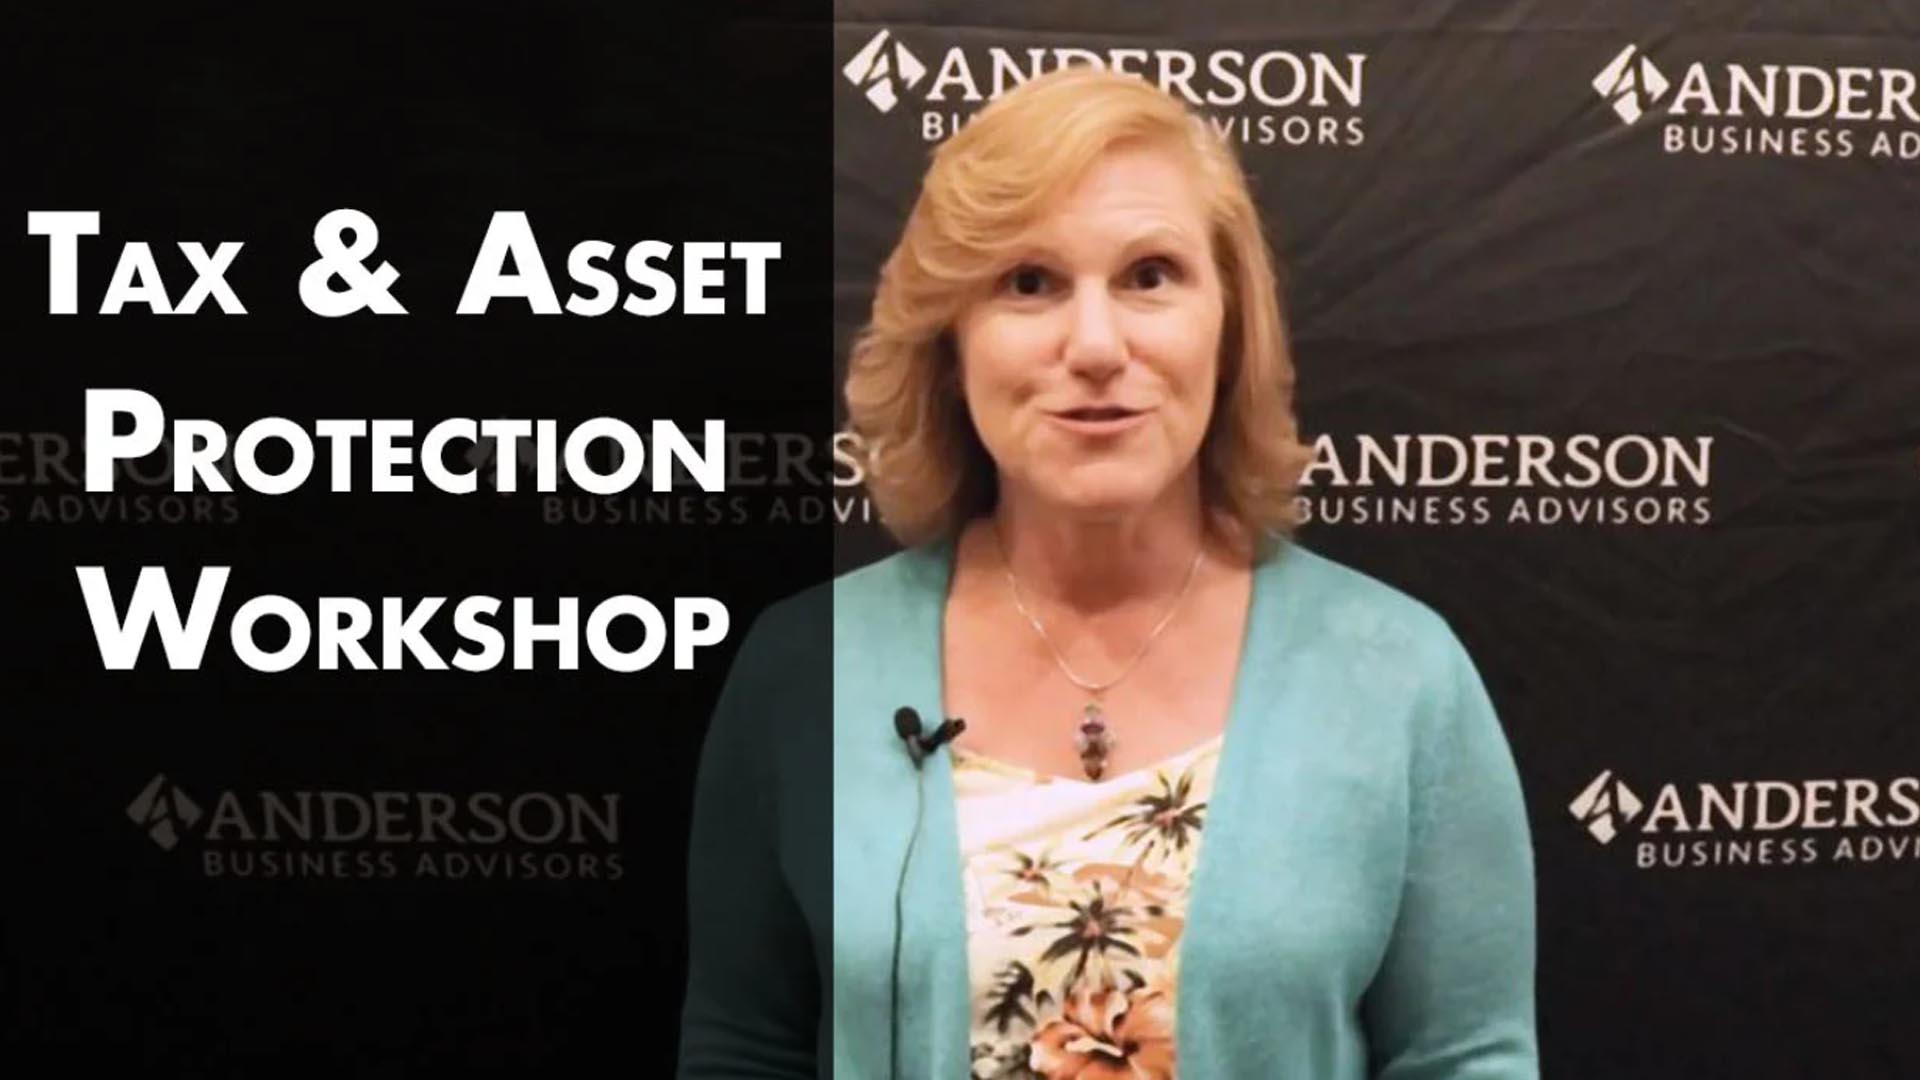 Anderson Business Advisors: Client Reviews and Testimonials